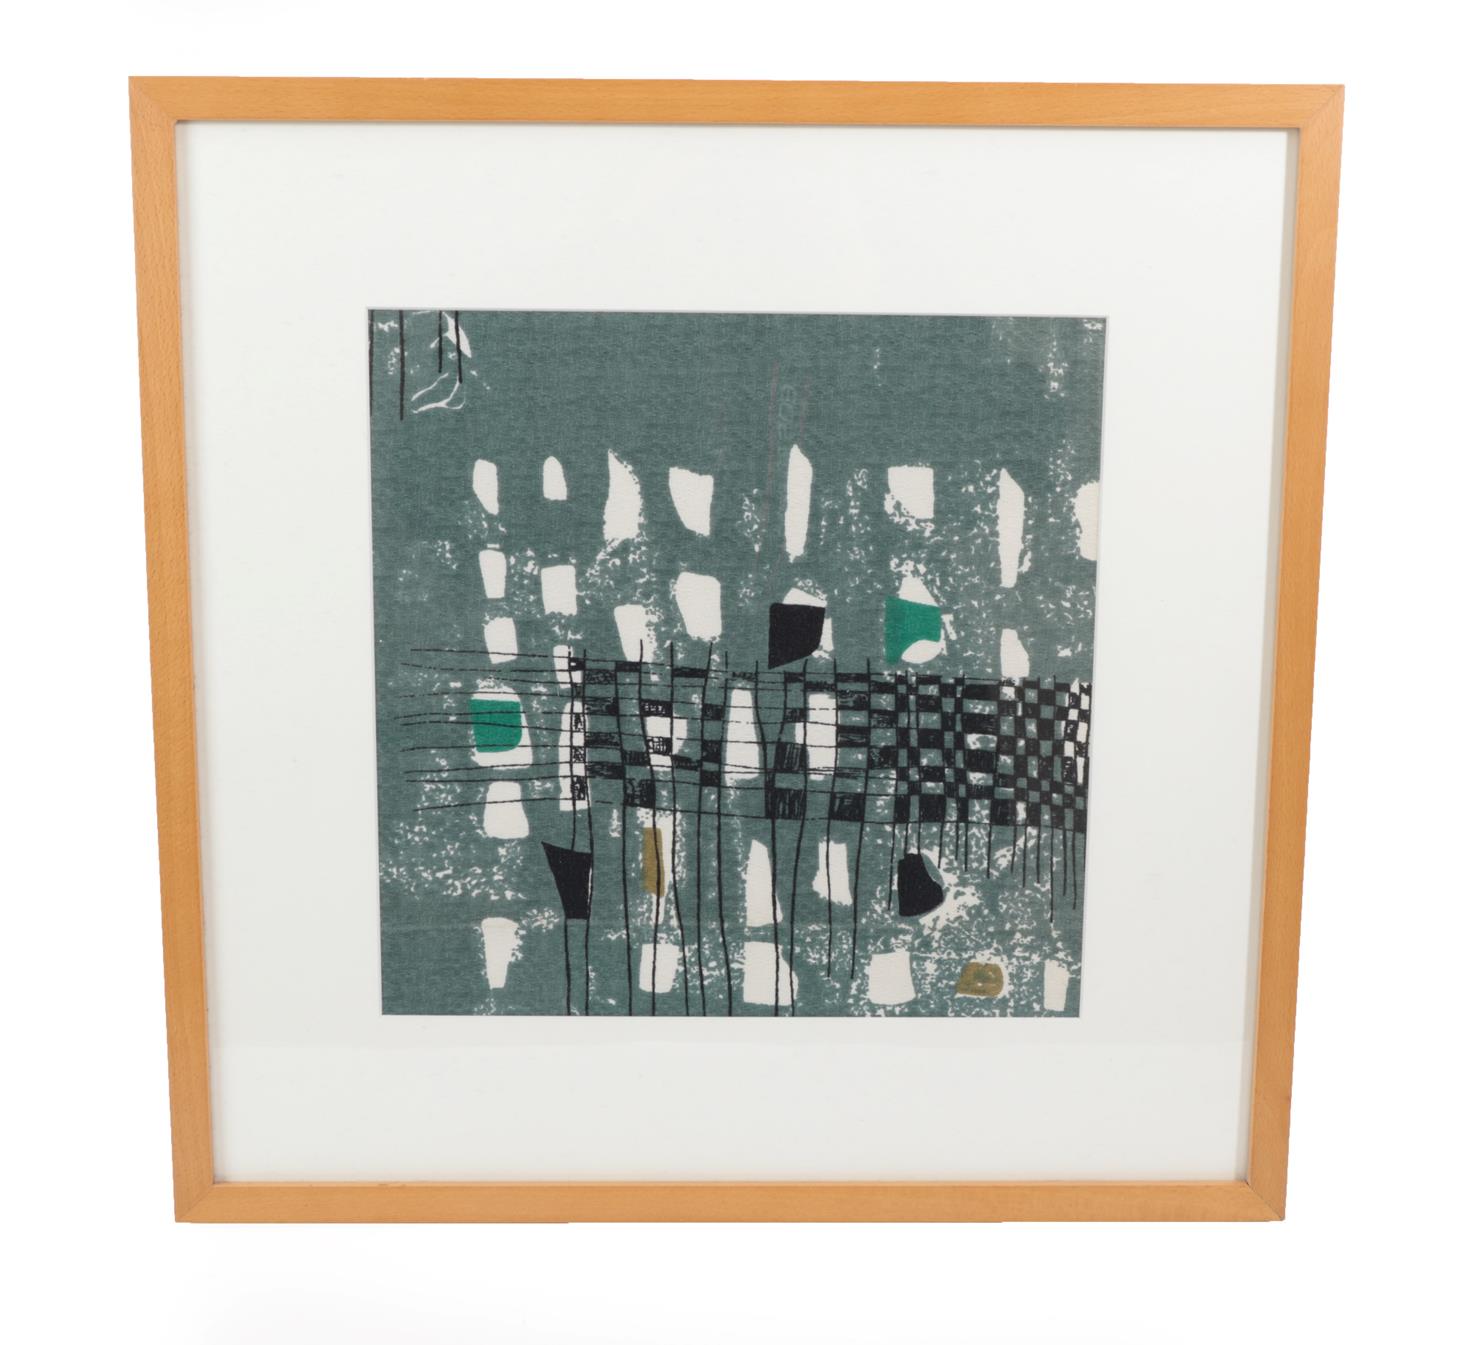 Lot 6011 - Circa 1960 Lucienne Day Fabric Sample 'Quatro' Pattern, framed, 53cm by 53cm